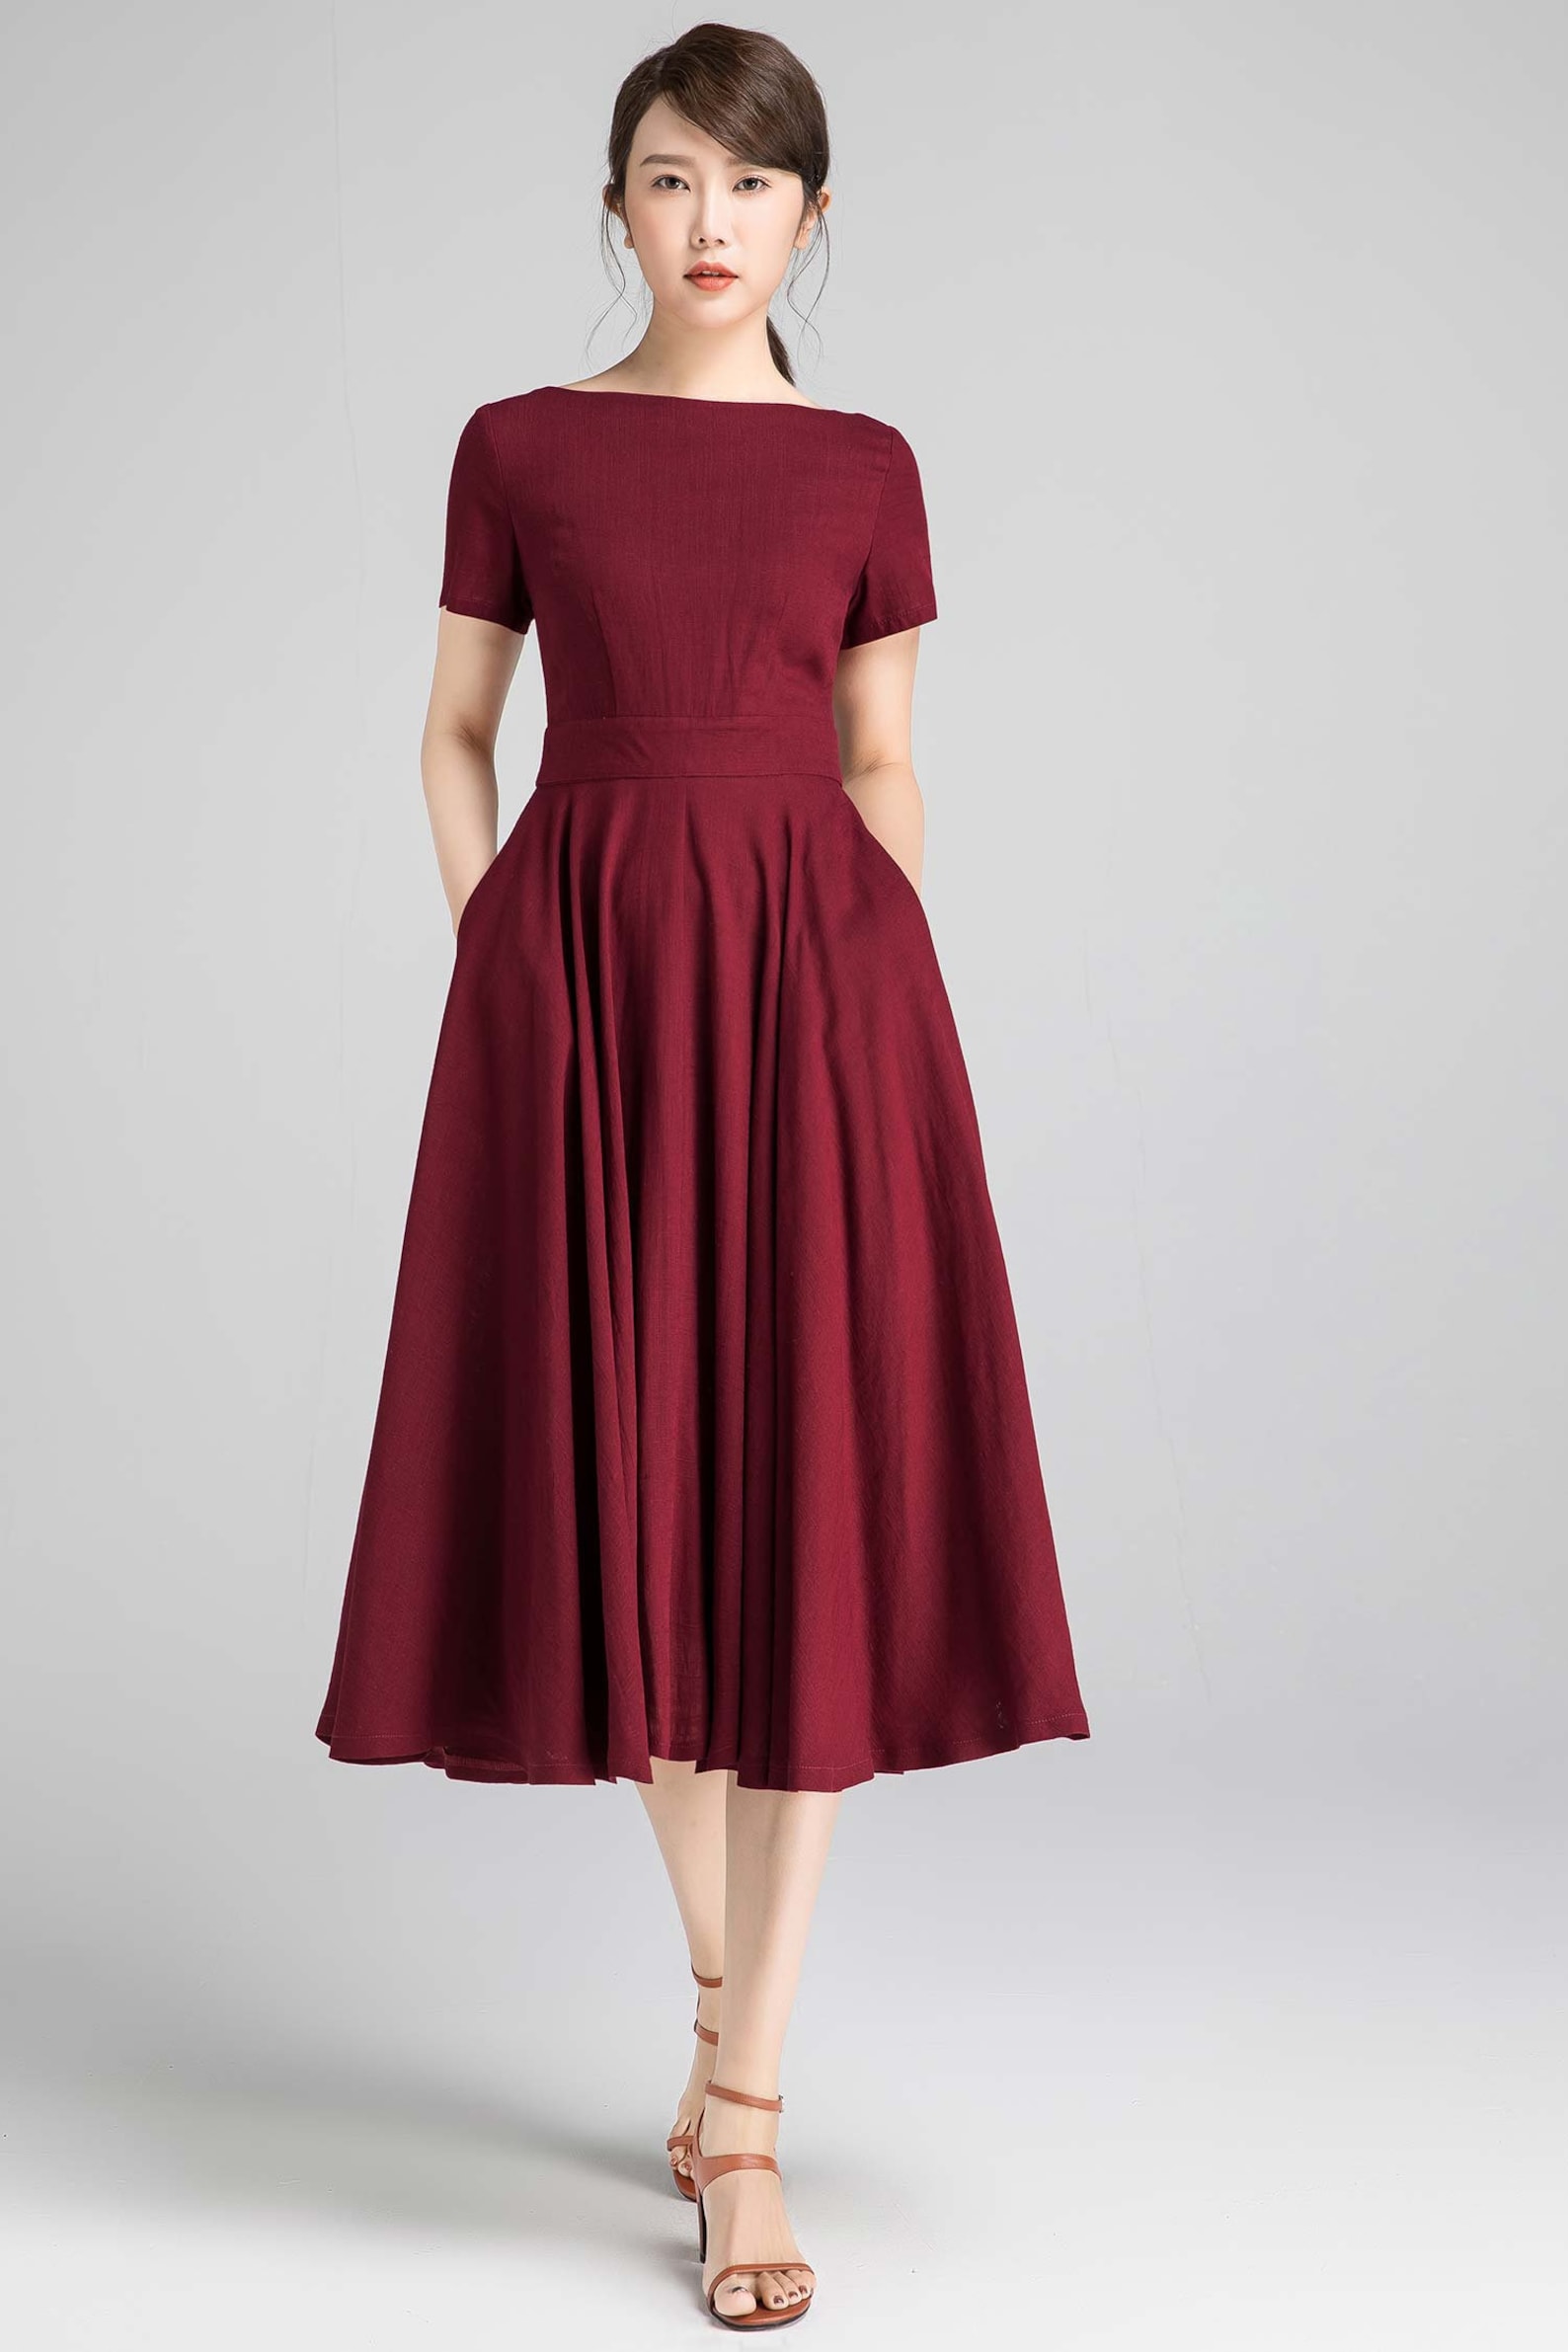 Fit and flare Midi dress in Burgundy Boat Neck swing Dress | Etsy